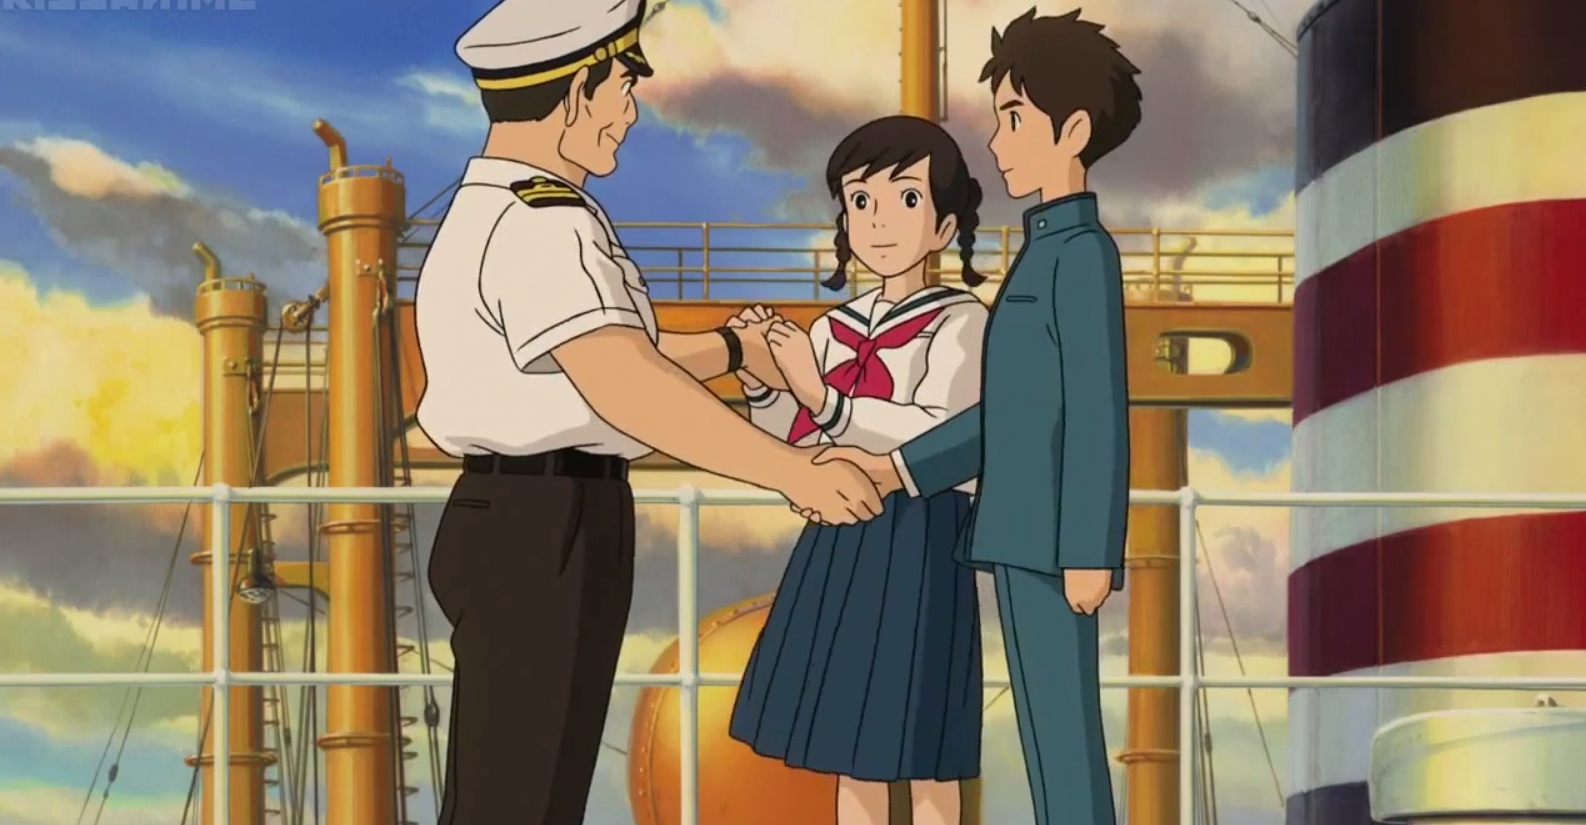 From Up on Poppy Hill Movie Review